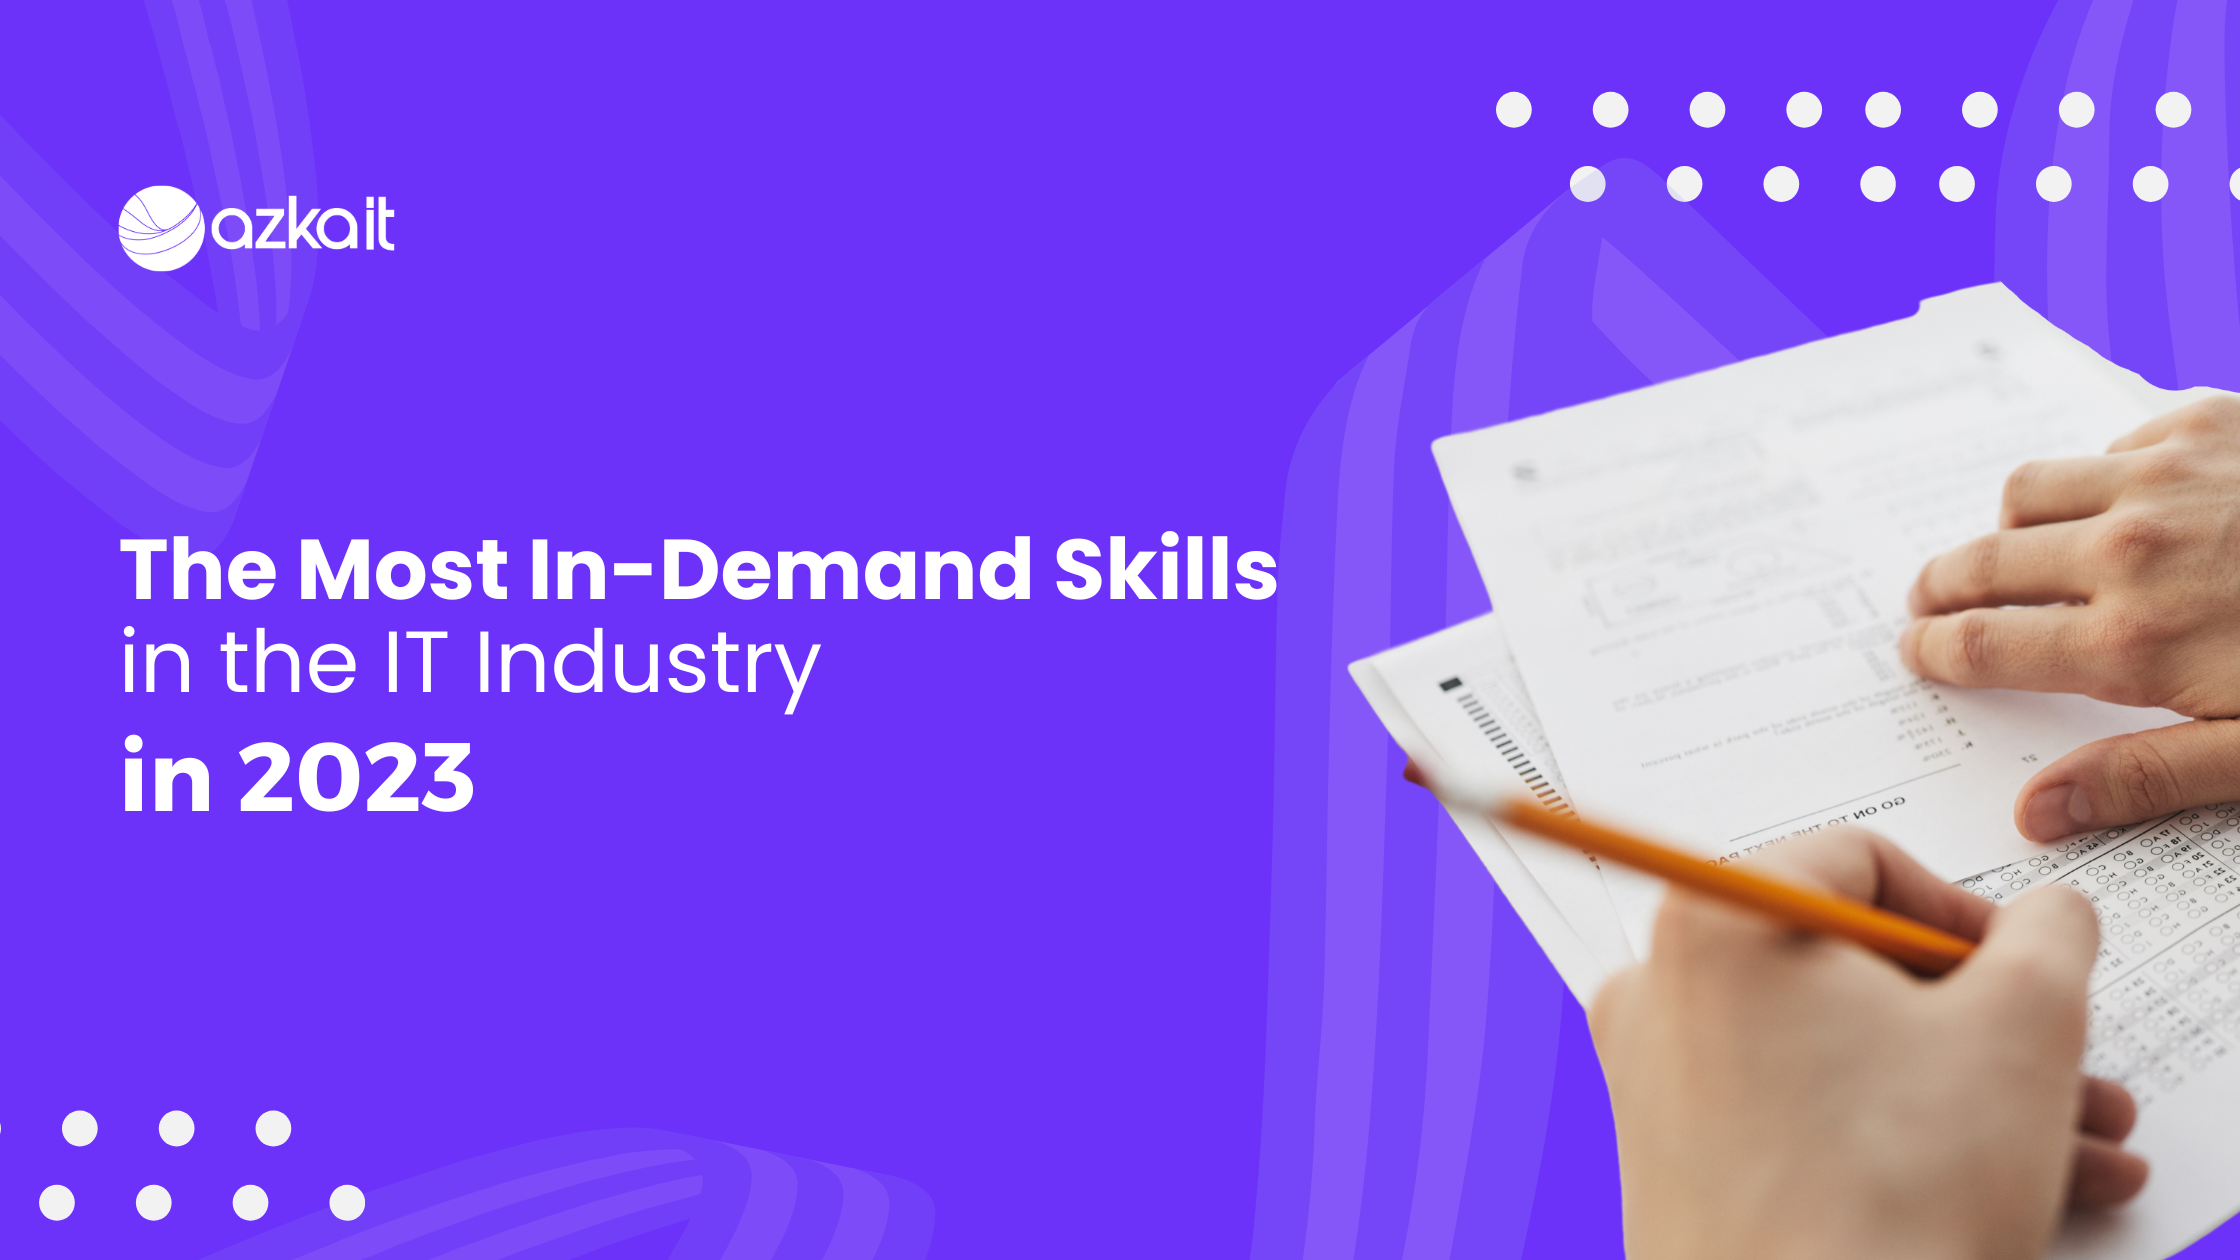 On Top of Technology: The Most In-Demand Skills in the IT Industry in 2023